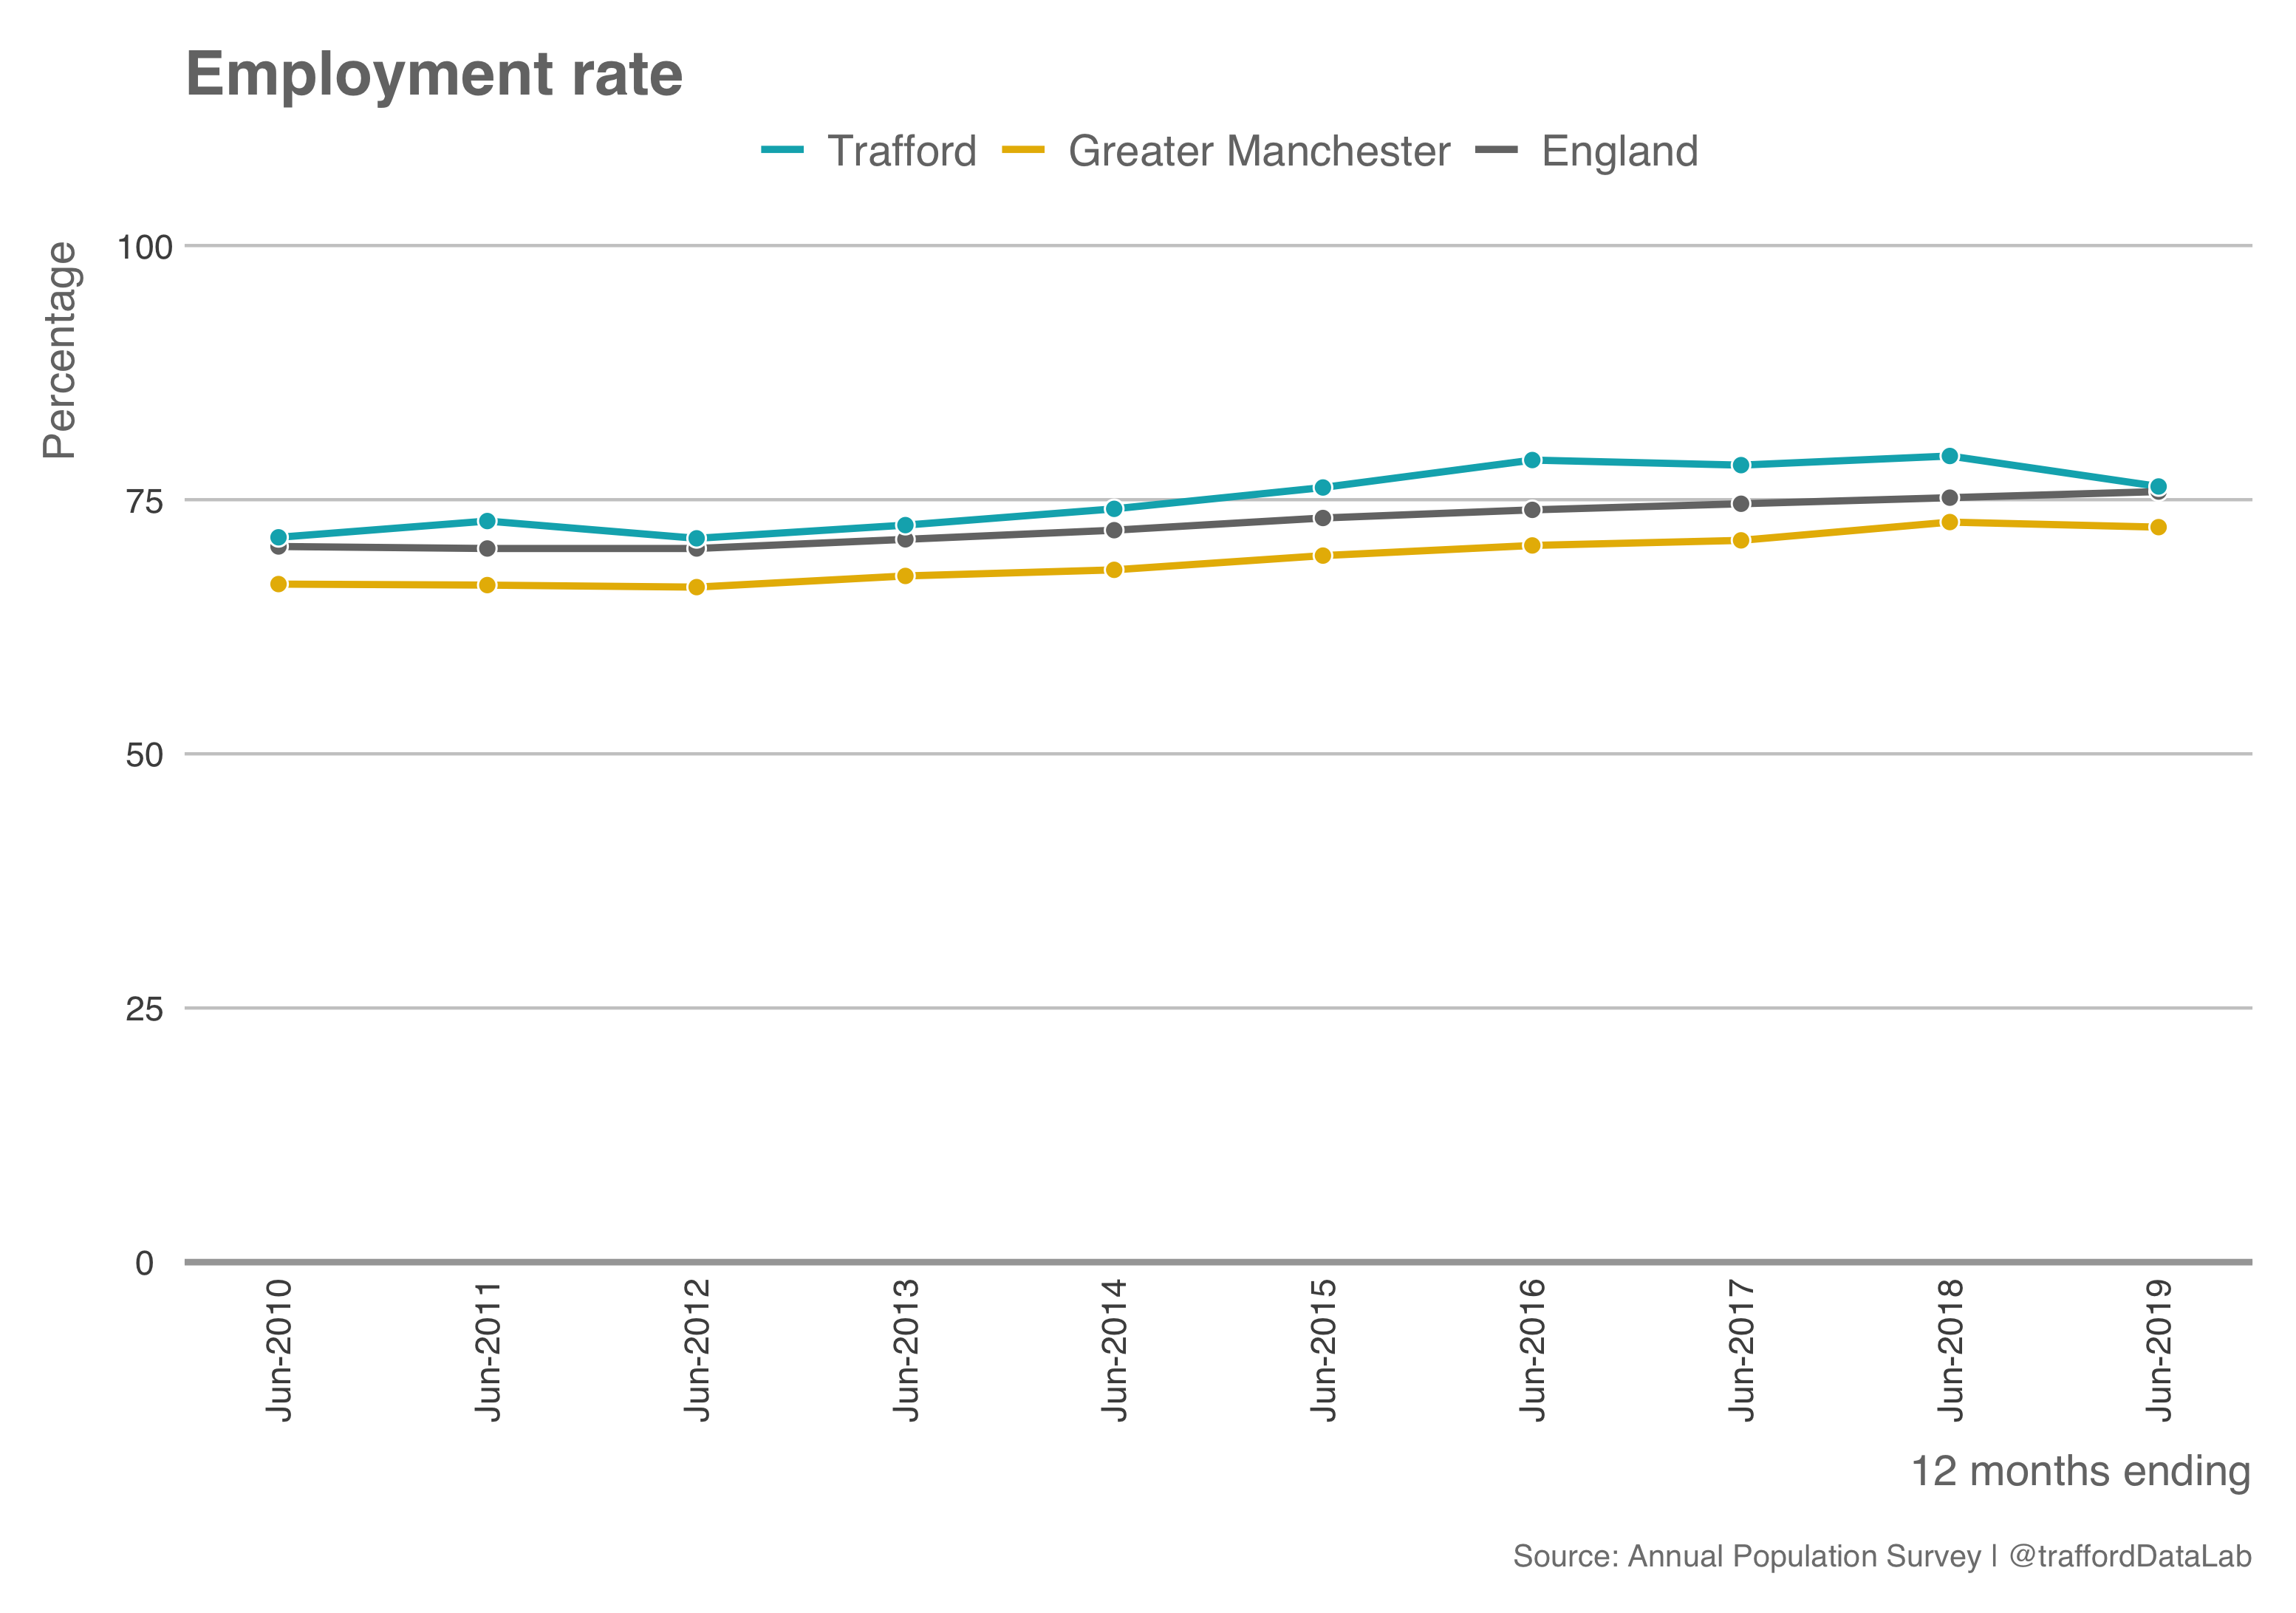 Rates of employment in Trafford, Greater Manchester and England, June 2010 - June 2019.